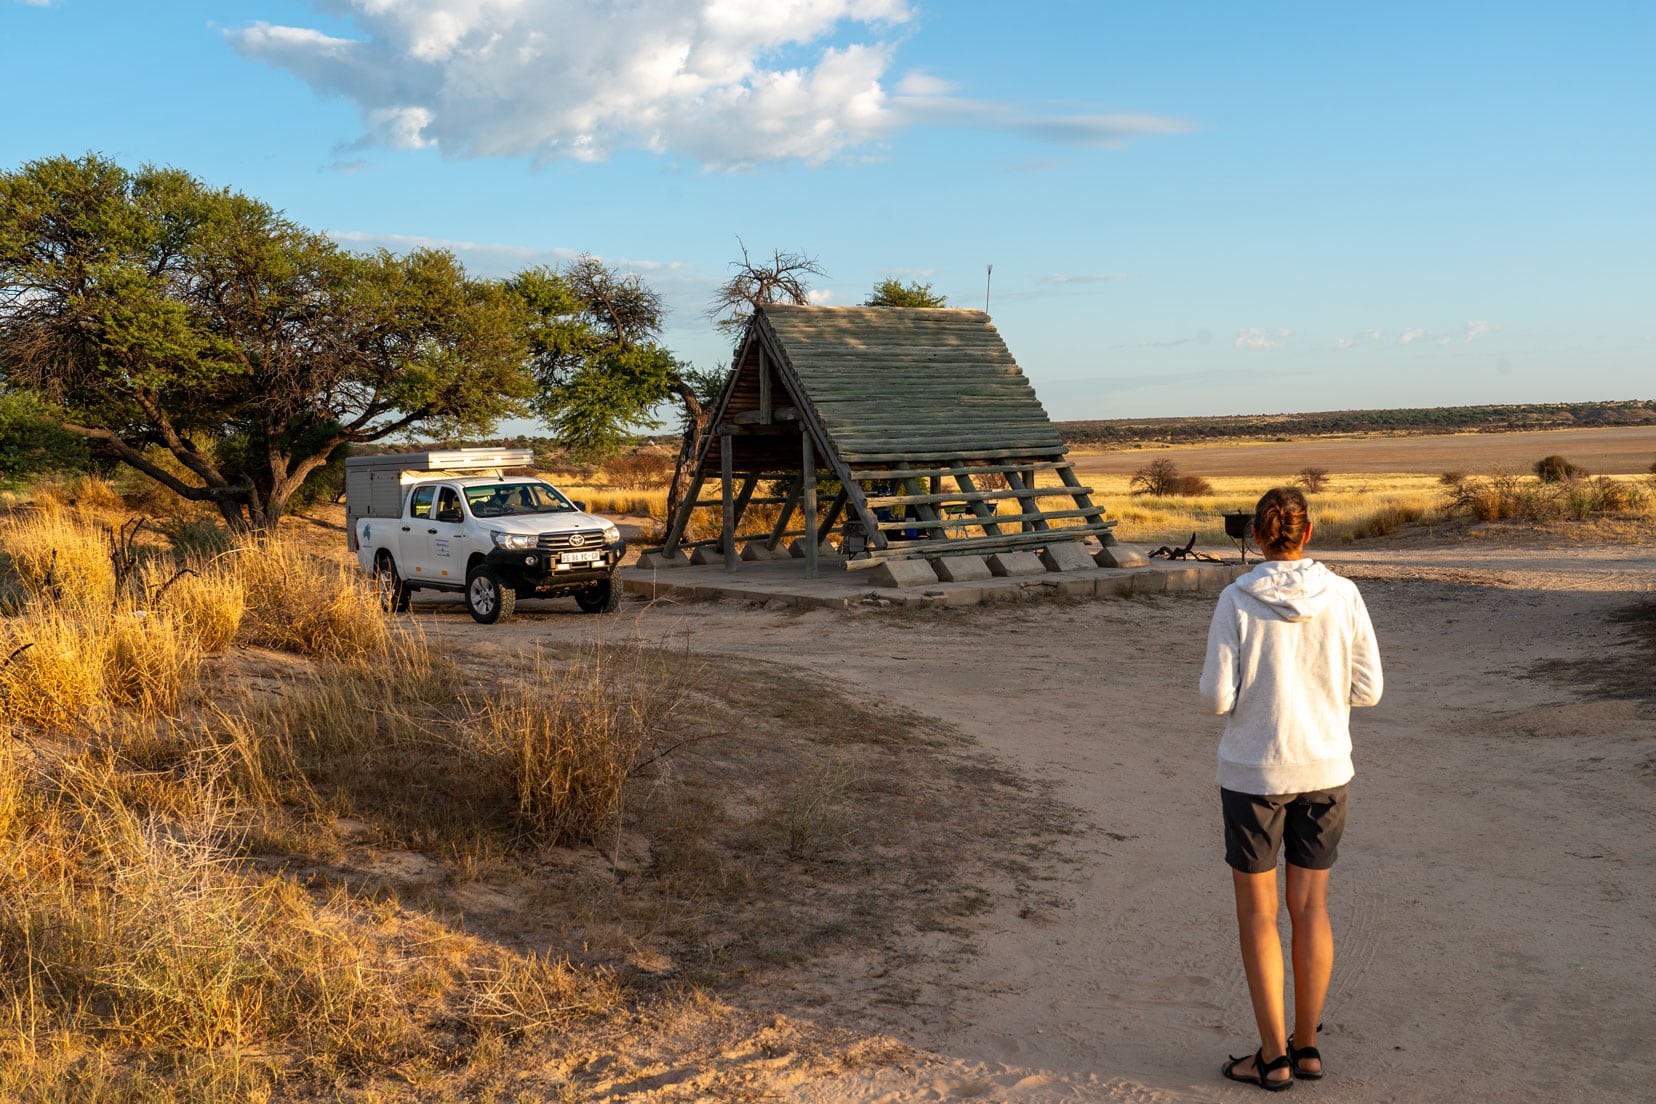 Camping in the Kgalagadi  with an A-Frame shelter beside the camper